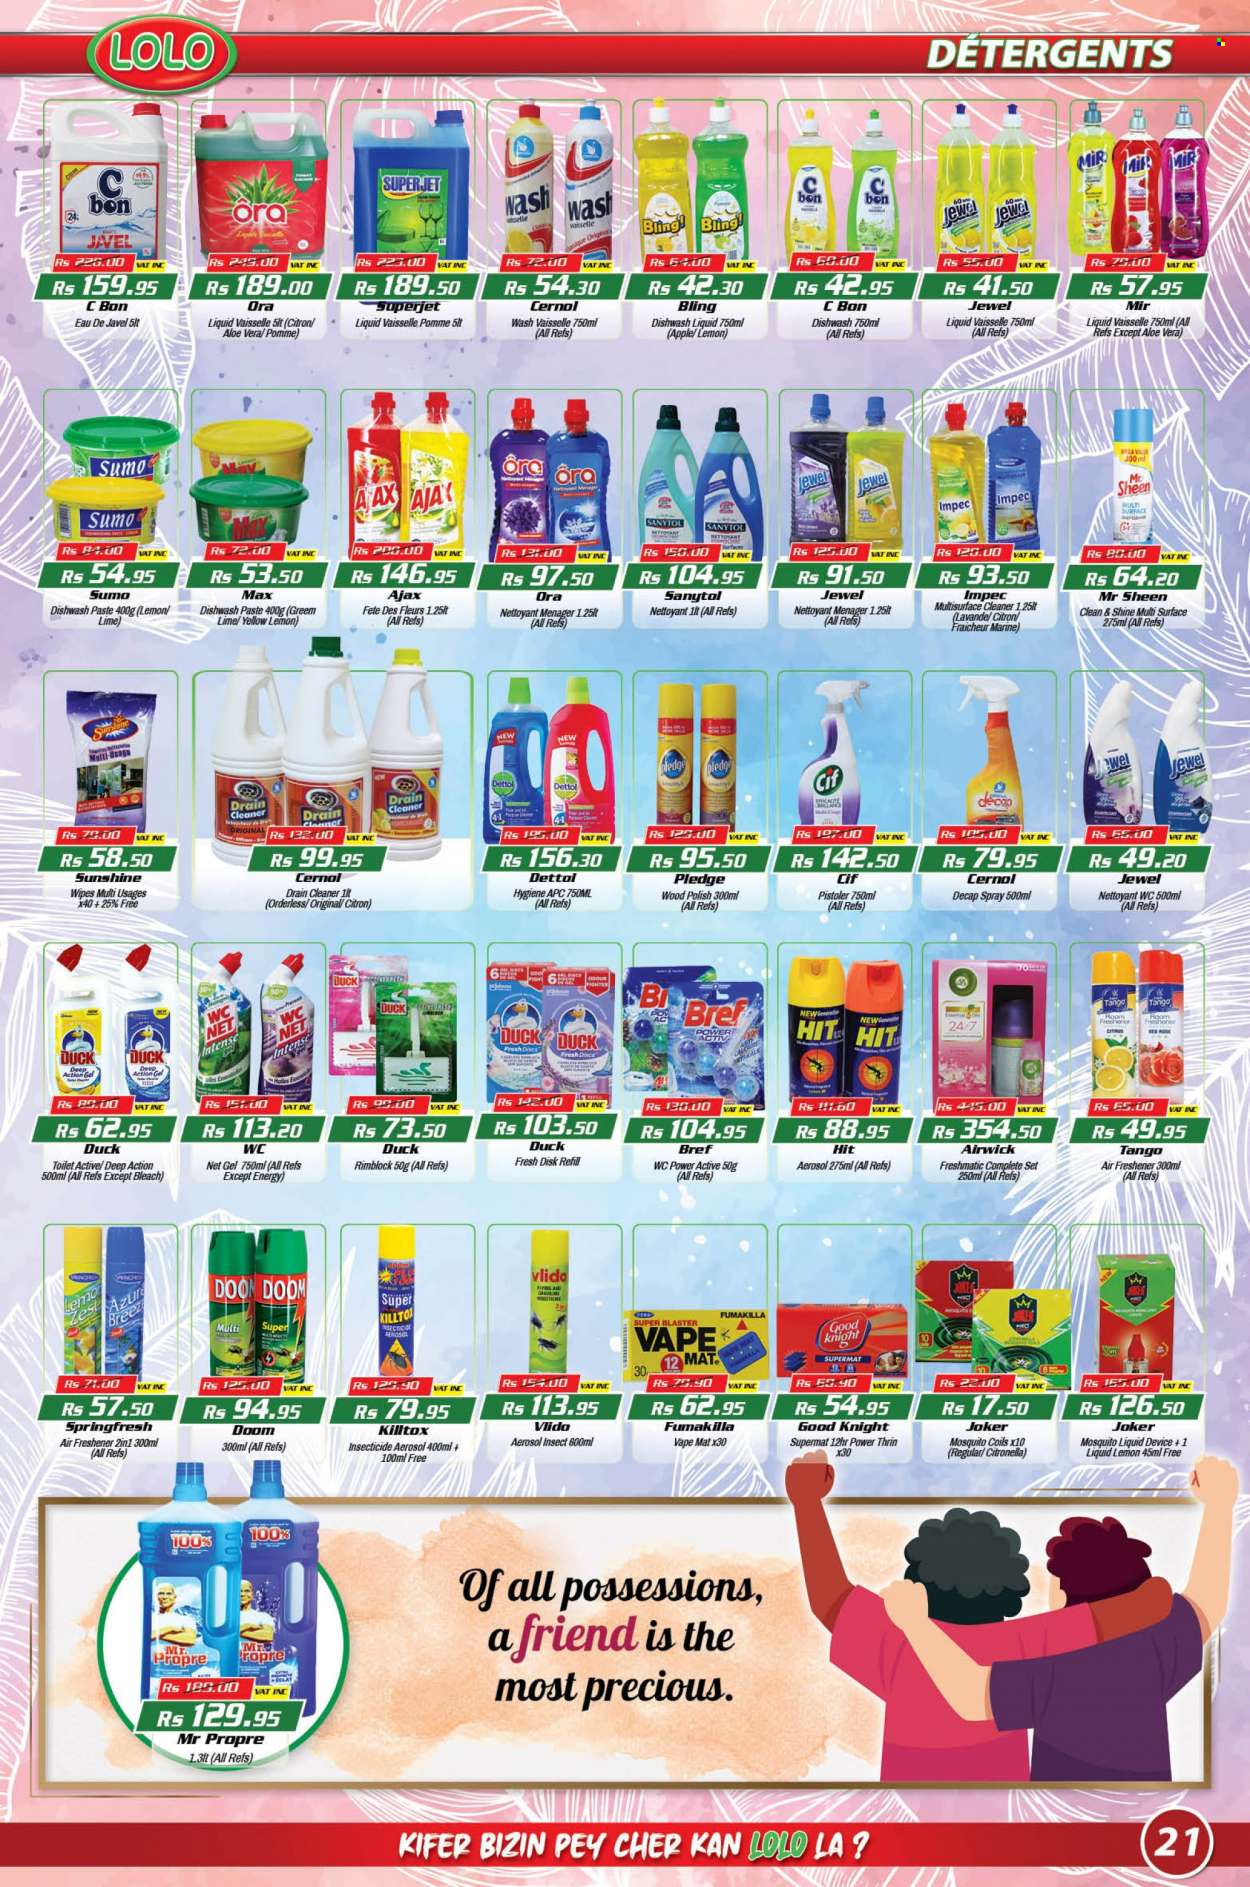 thumbnail - LOLO Hyper Catalogue - 26.09.2022 - 17.10.2022 - Sales products - Sunshine, wipes, cleaner, bleach, Cif, Ajax, Pledge, dishwashing liquid, insecticide, air freshener, Air Wick, hat, Dettol, Sanytol. Page 21.